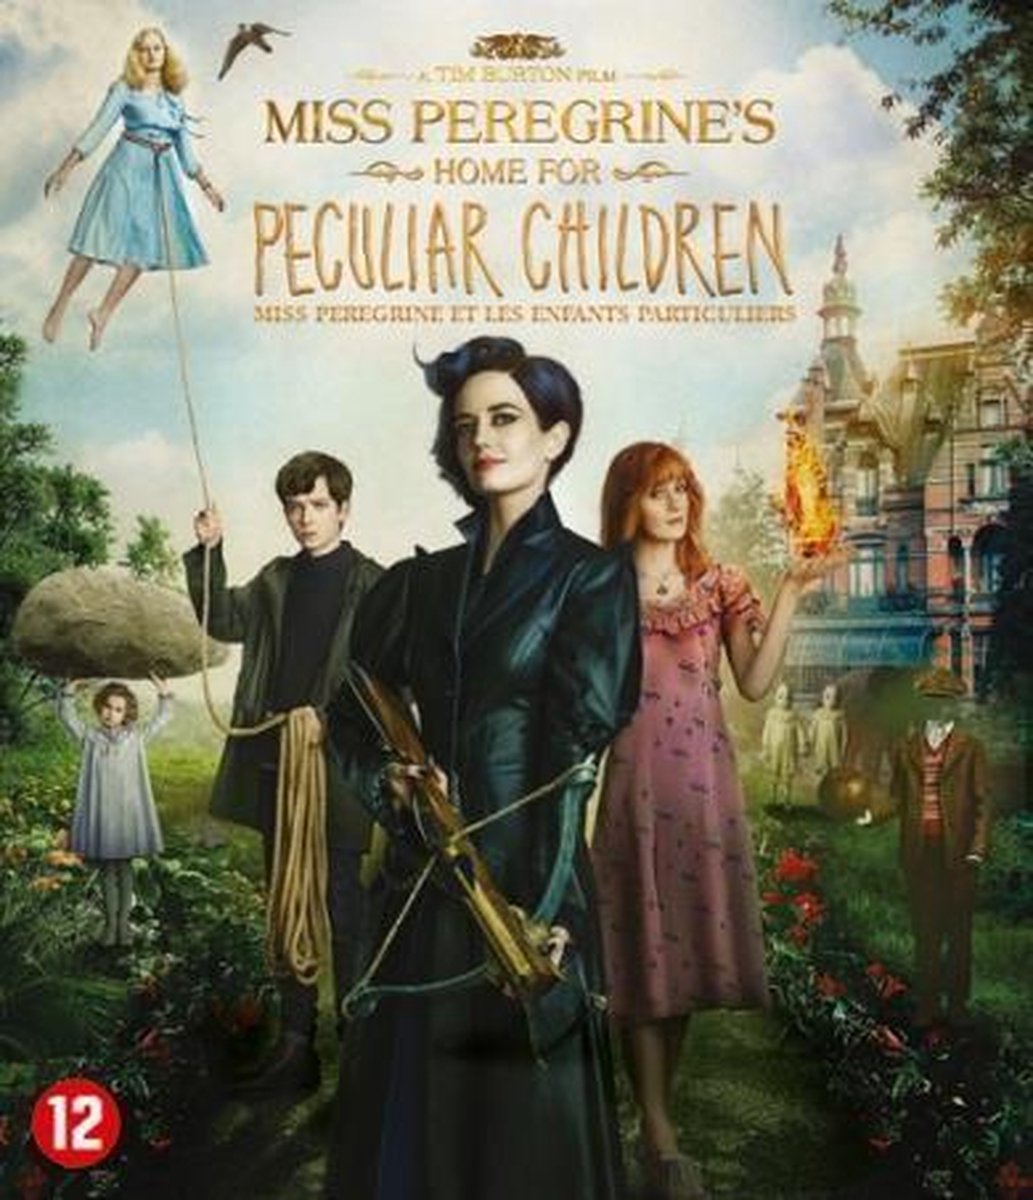 Miss Peregrine’S Home For Peculiar Children (Blu-ray) - Disney Movies